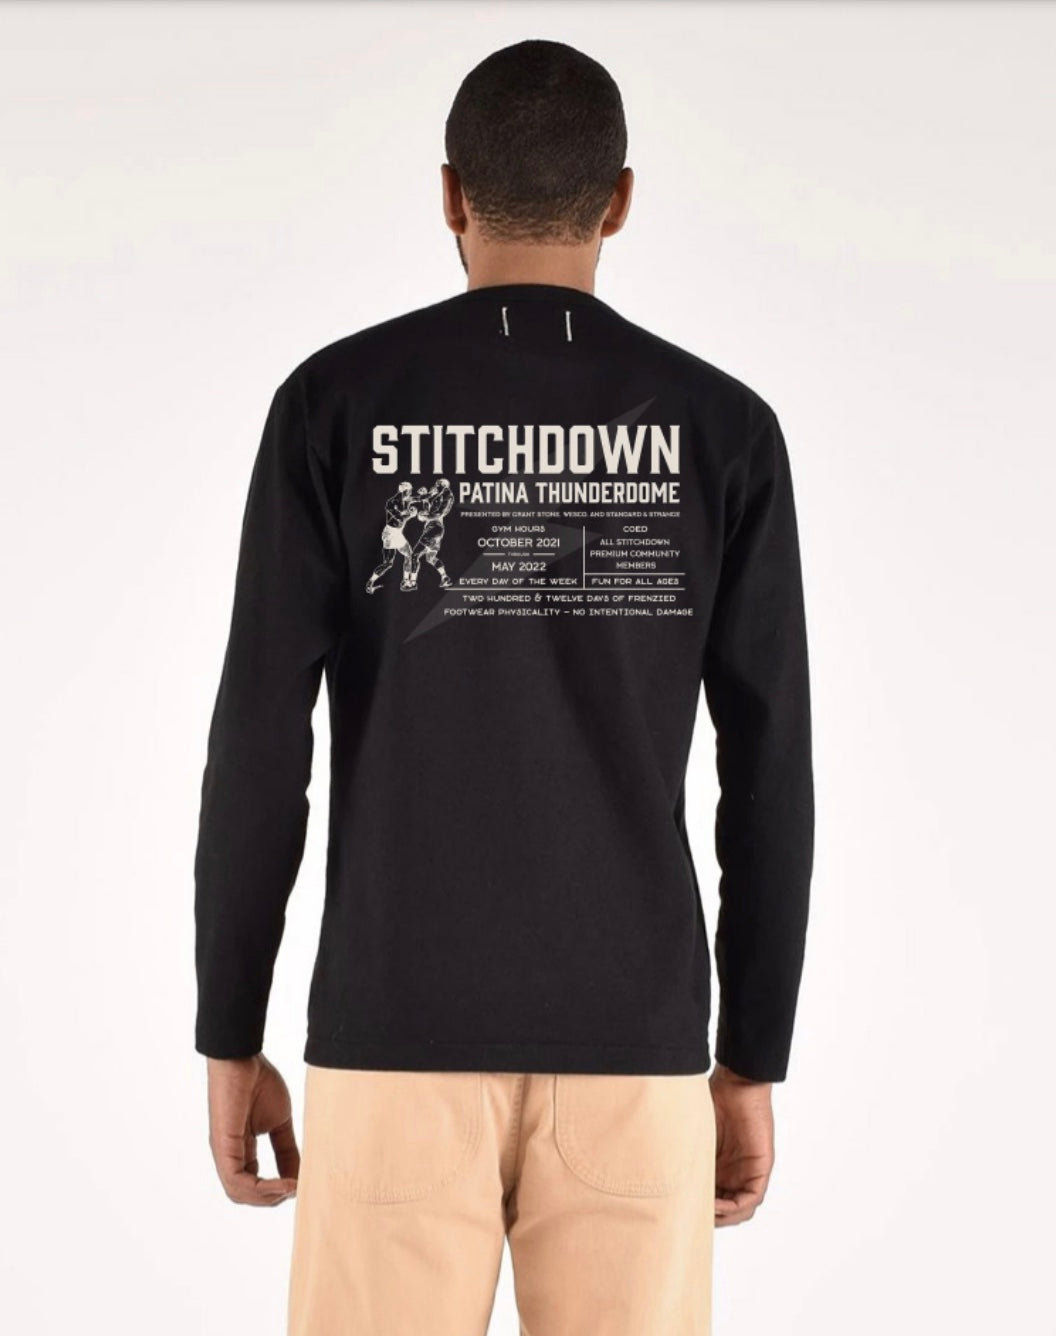 Stitchdown x Dehen Patina Thunderdome Long Sleeve Tee—Black SOLD OUT